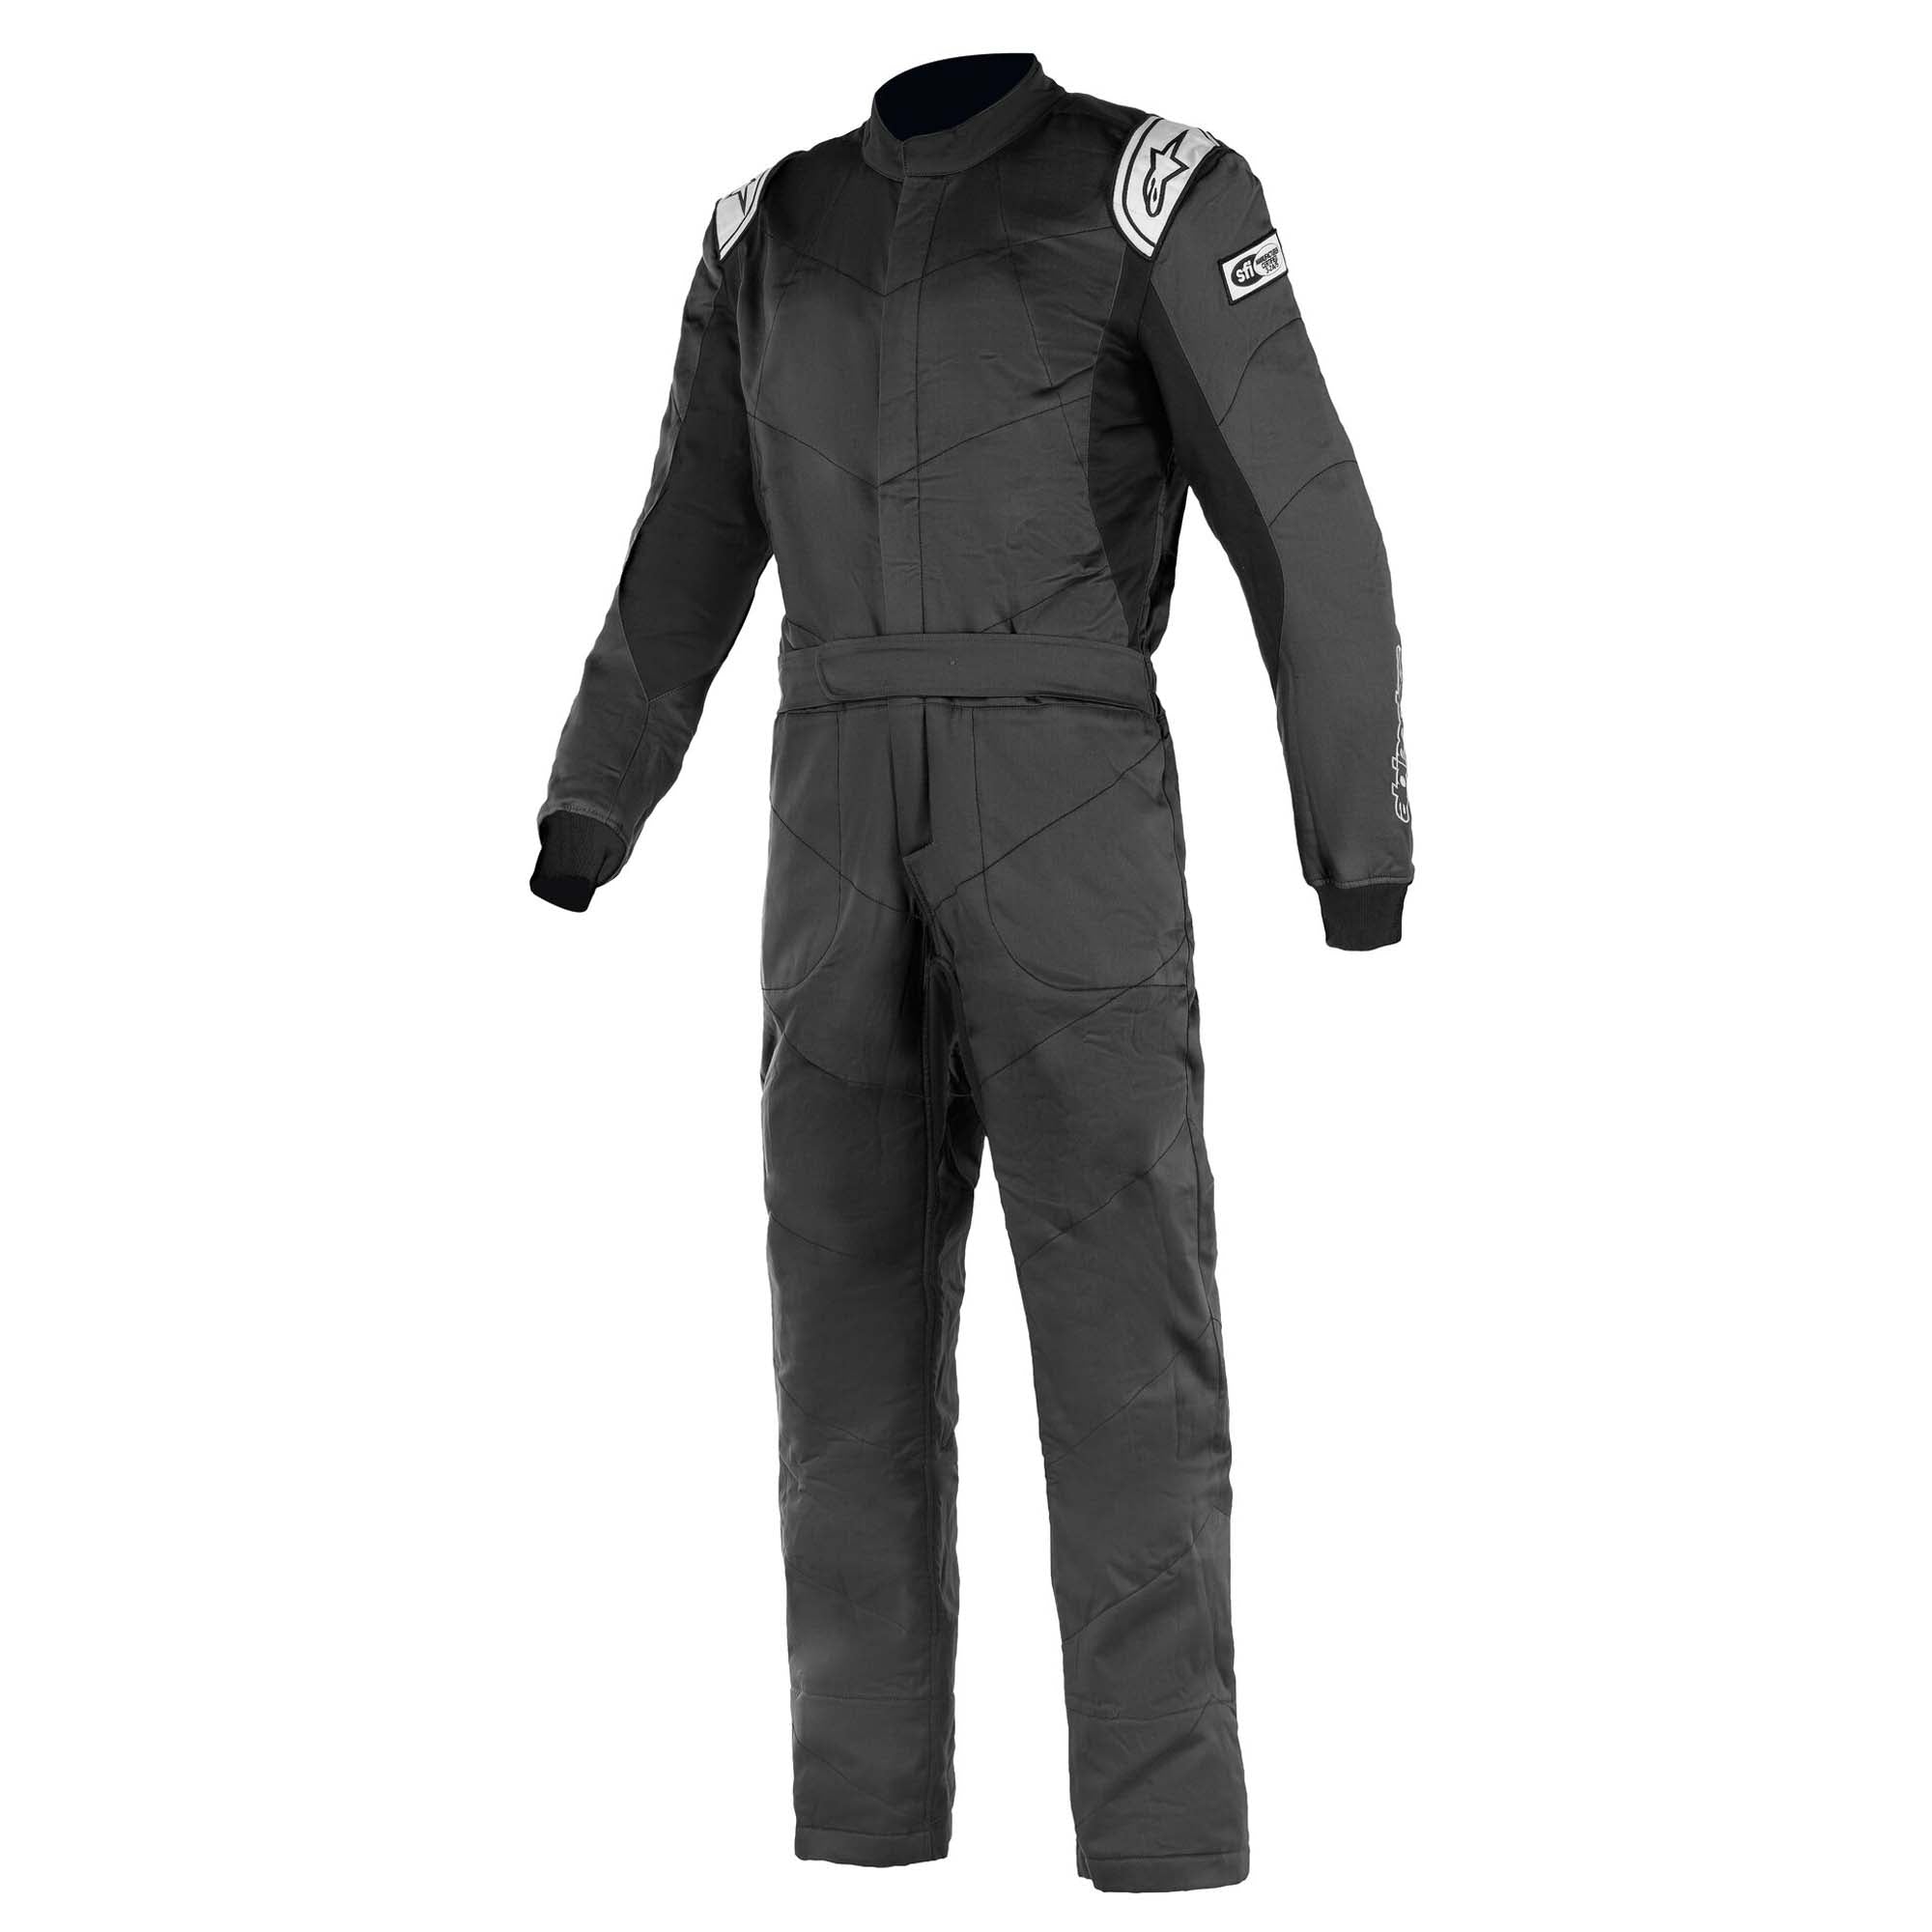 Alpinestars Knoxville v2 Racing Suit